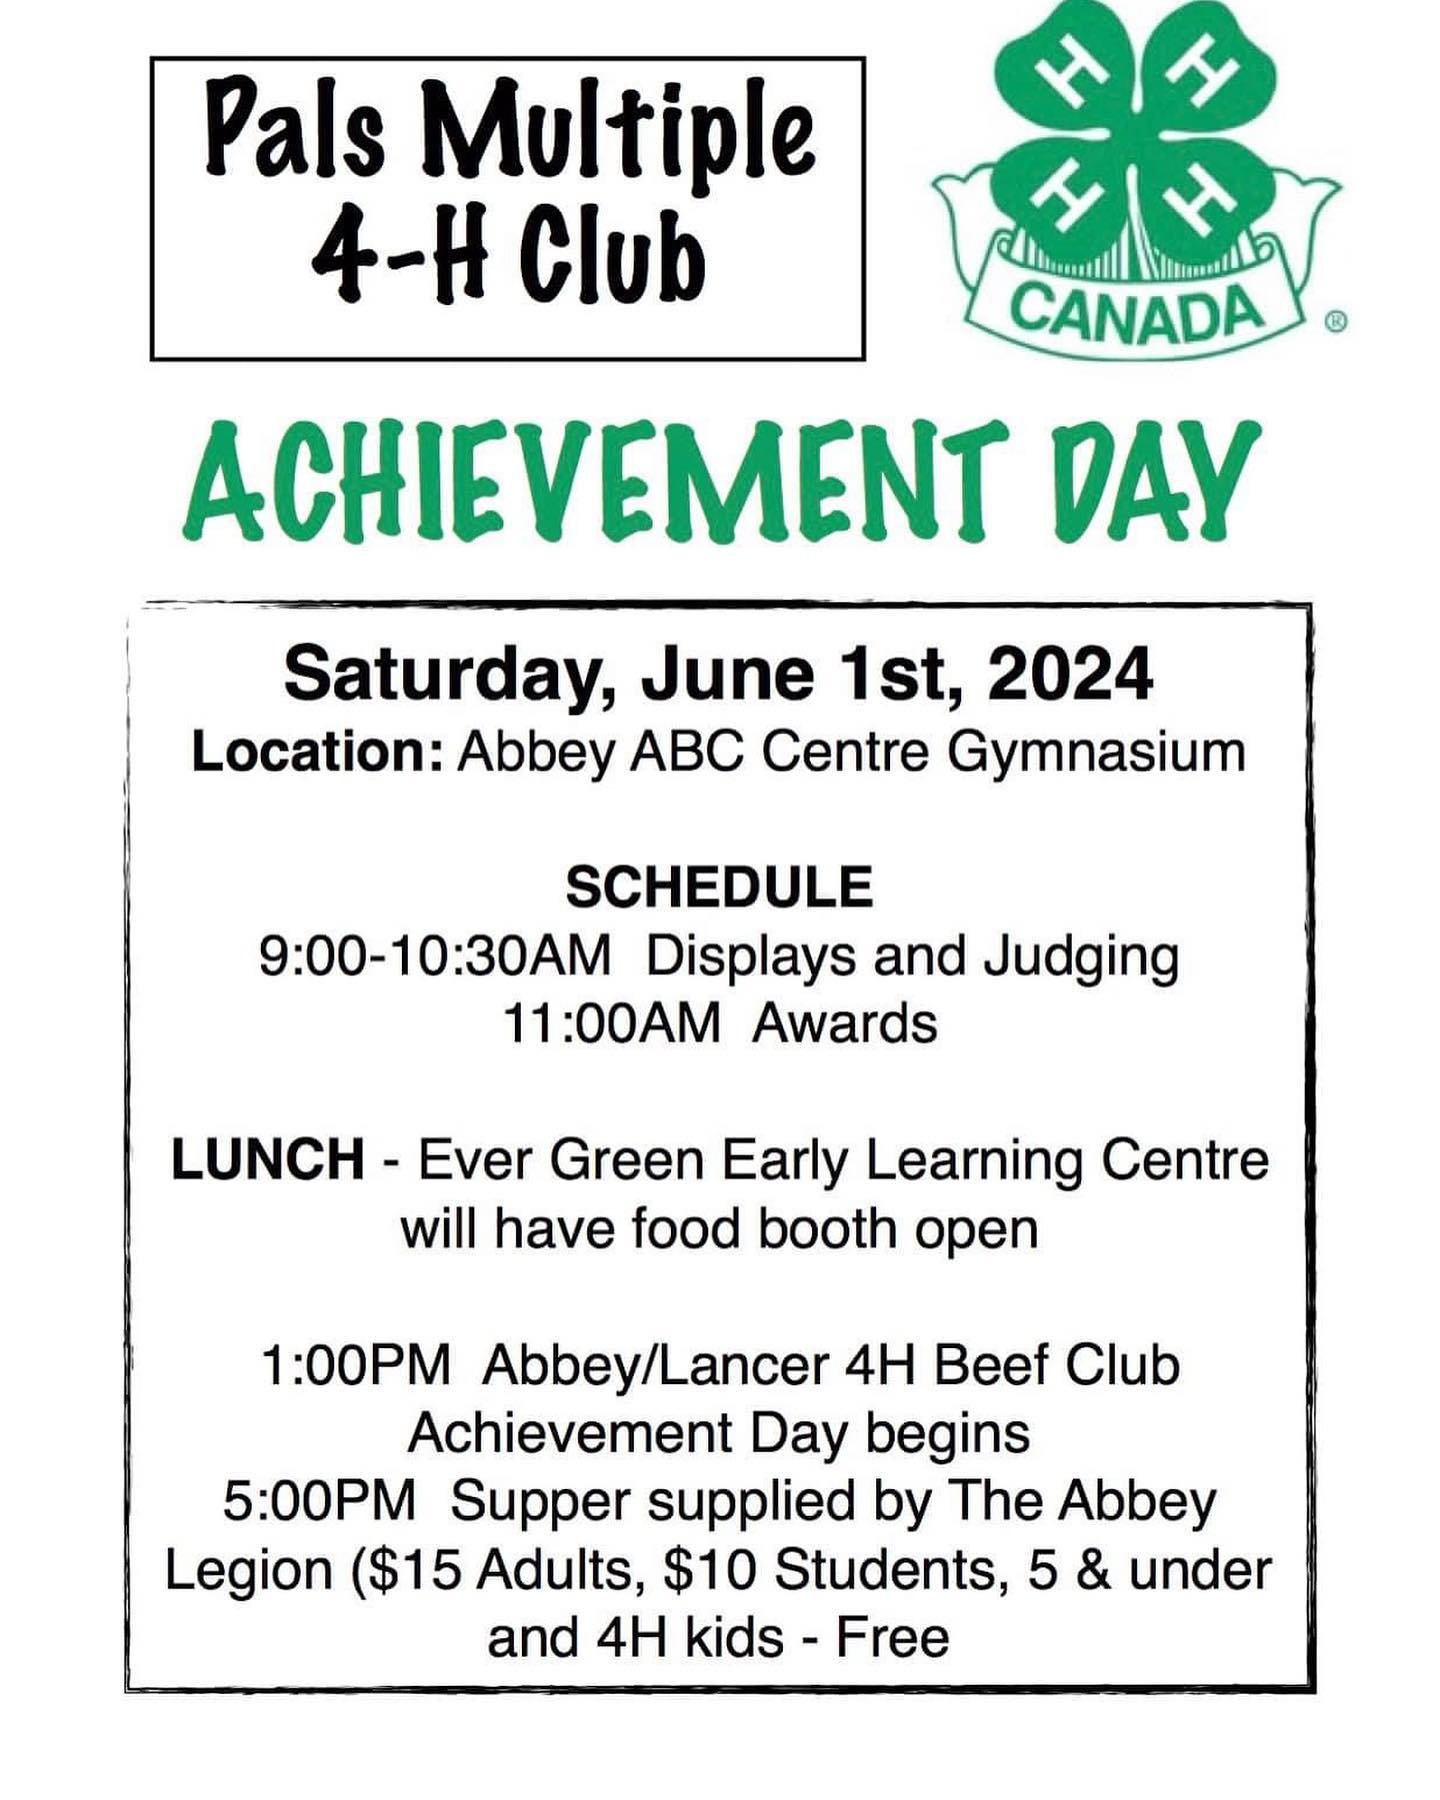 The PALS Multiple 4H Club and Abbey - Lancer 4-H Beef Club Achievement Days will both be held at Abbey at the ABC Centre on Saturday June 1! Come check out all the hard work these kiddos have put into their projects🍀